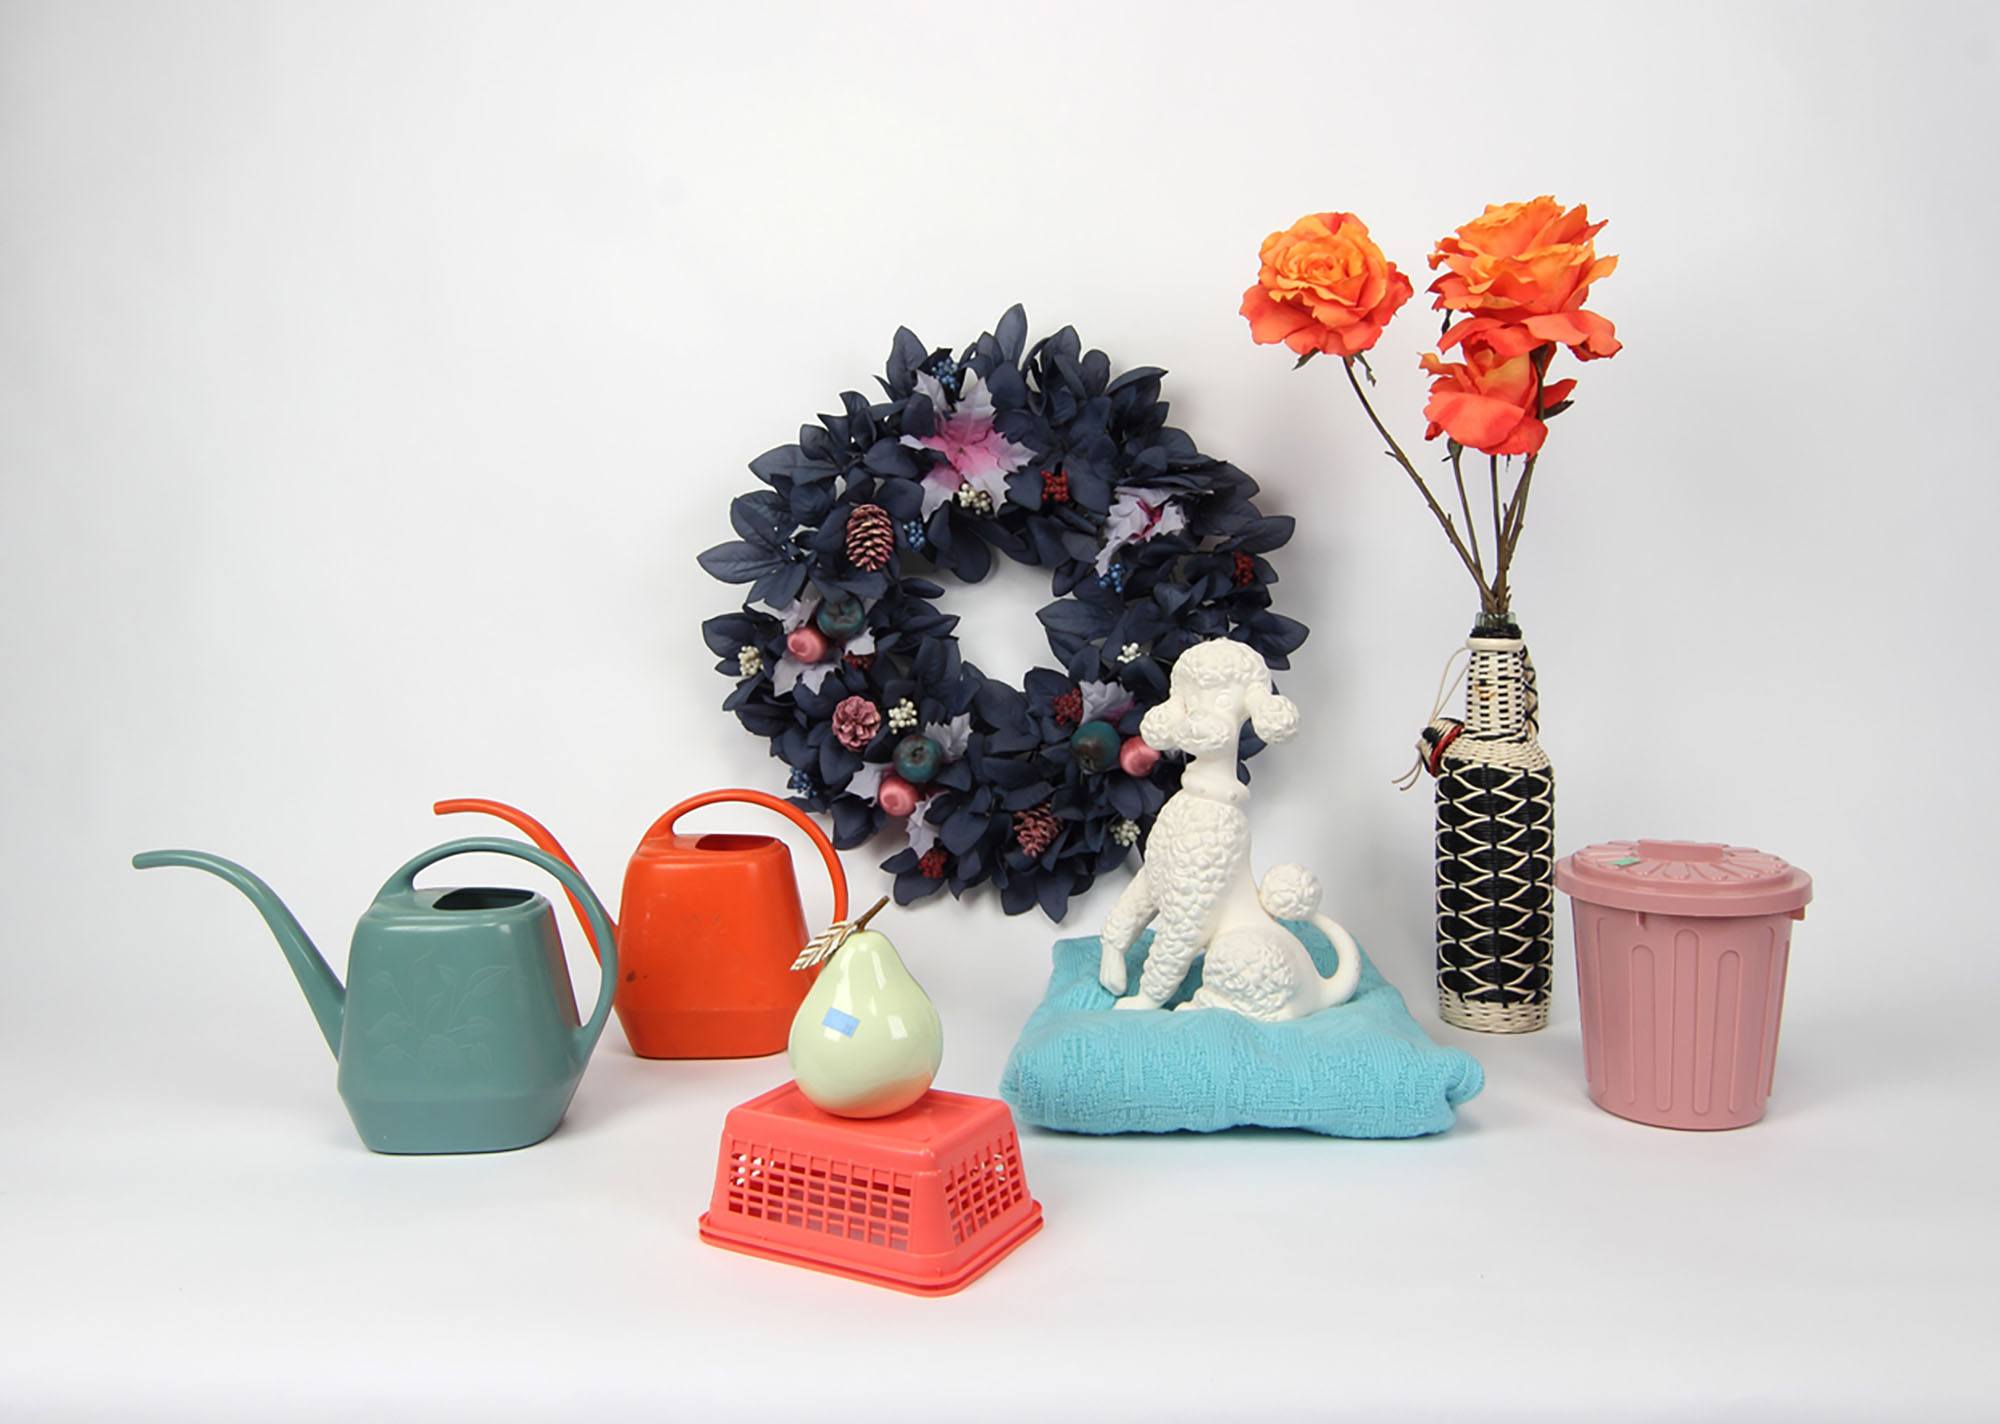 A still life of watering cans, a trash can, a poodle sculpture, a wreath, a pear sculpture, and flowers